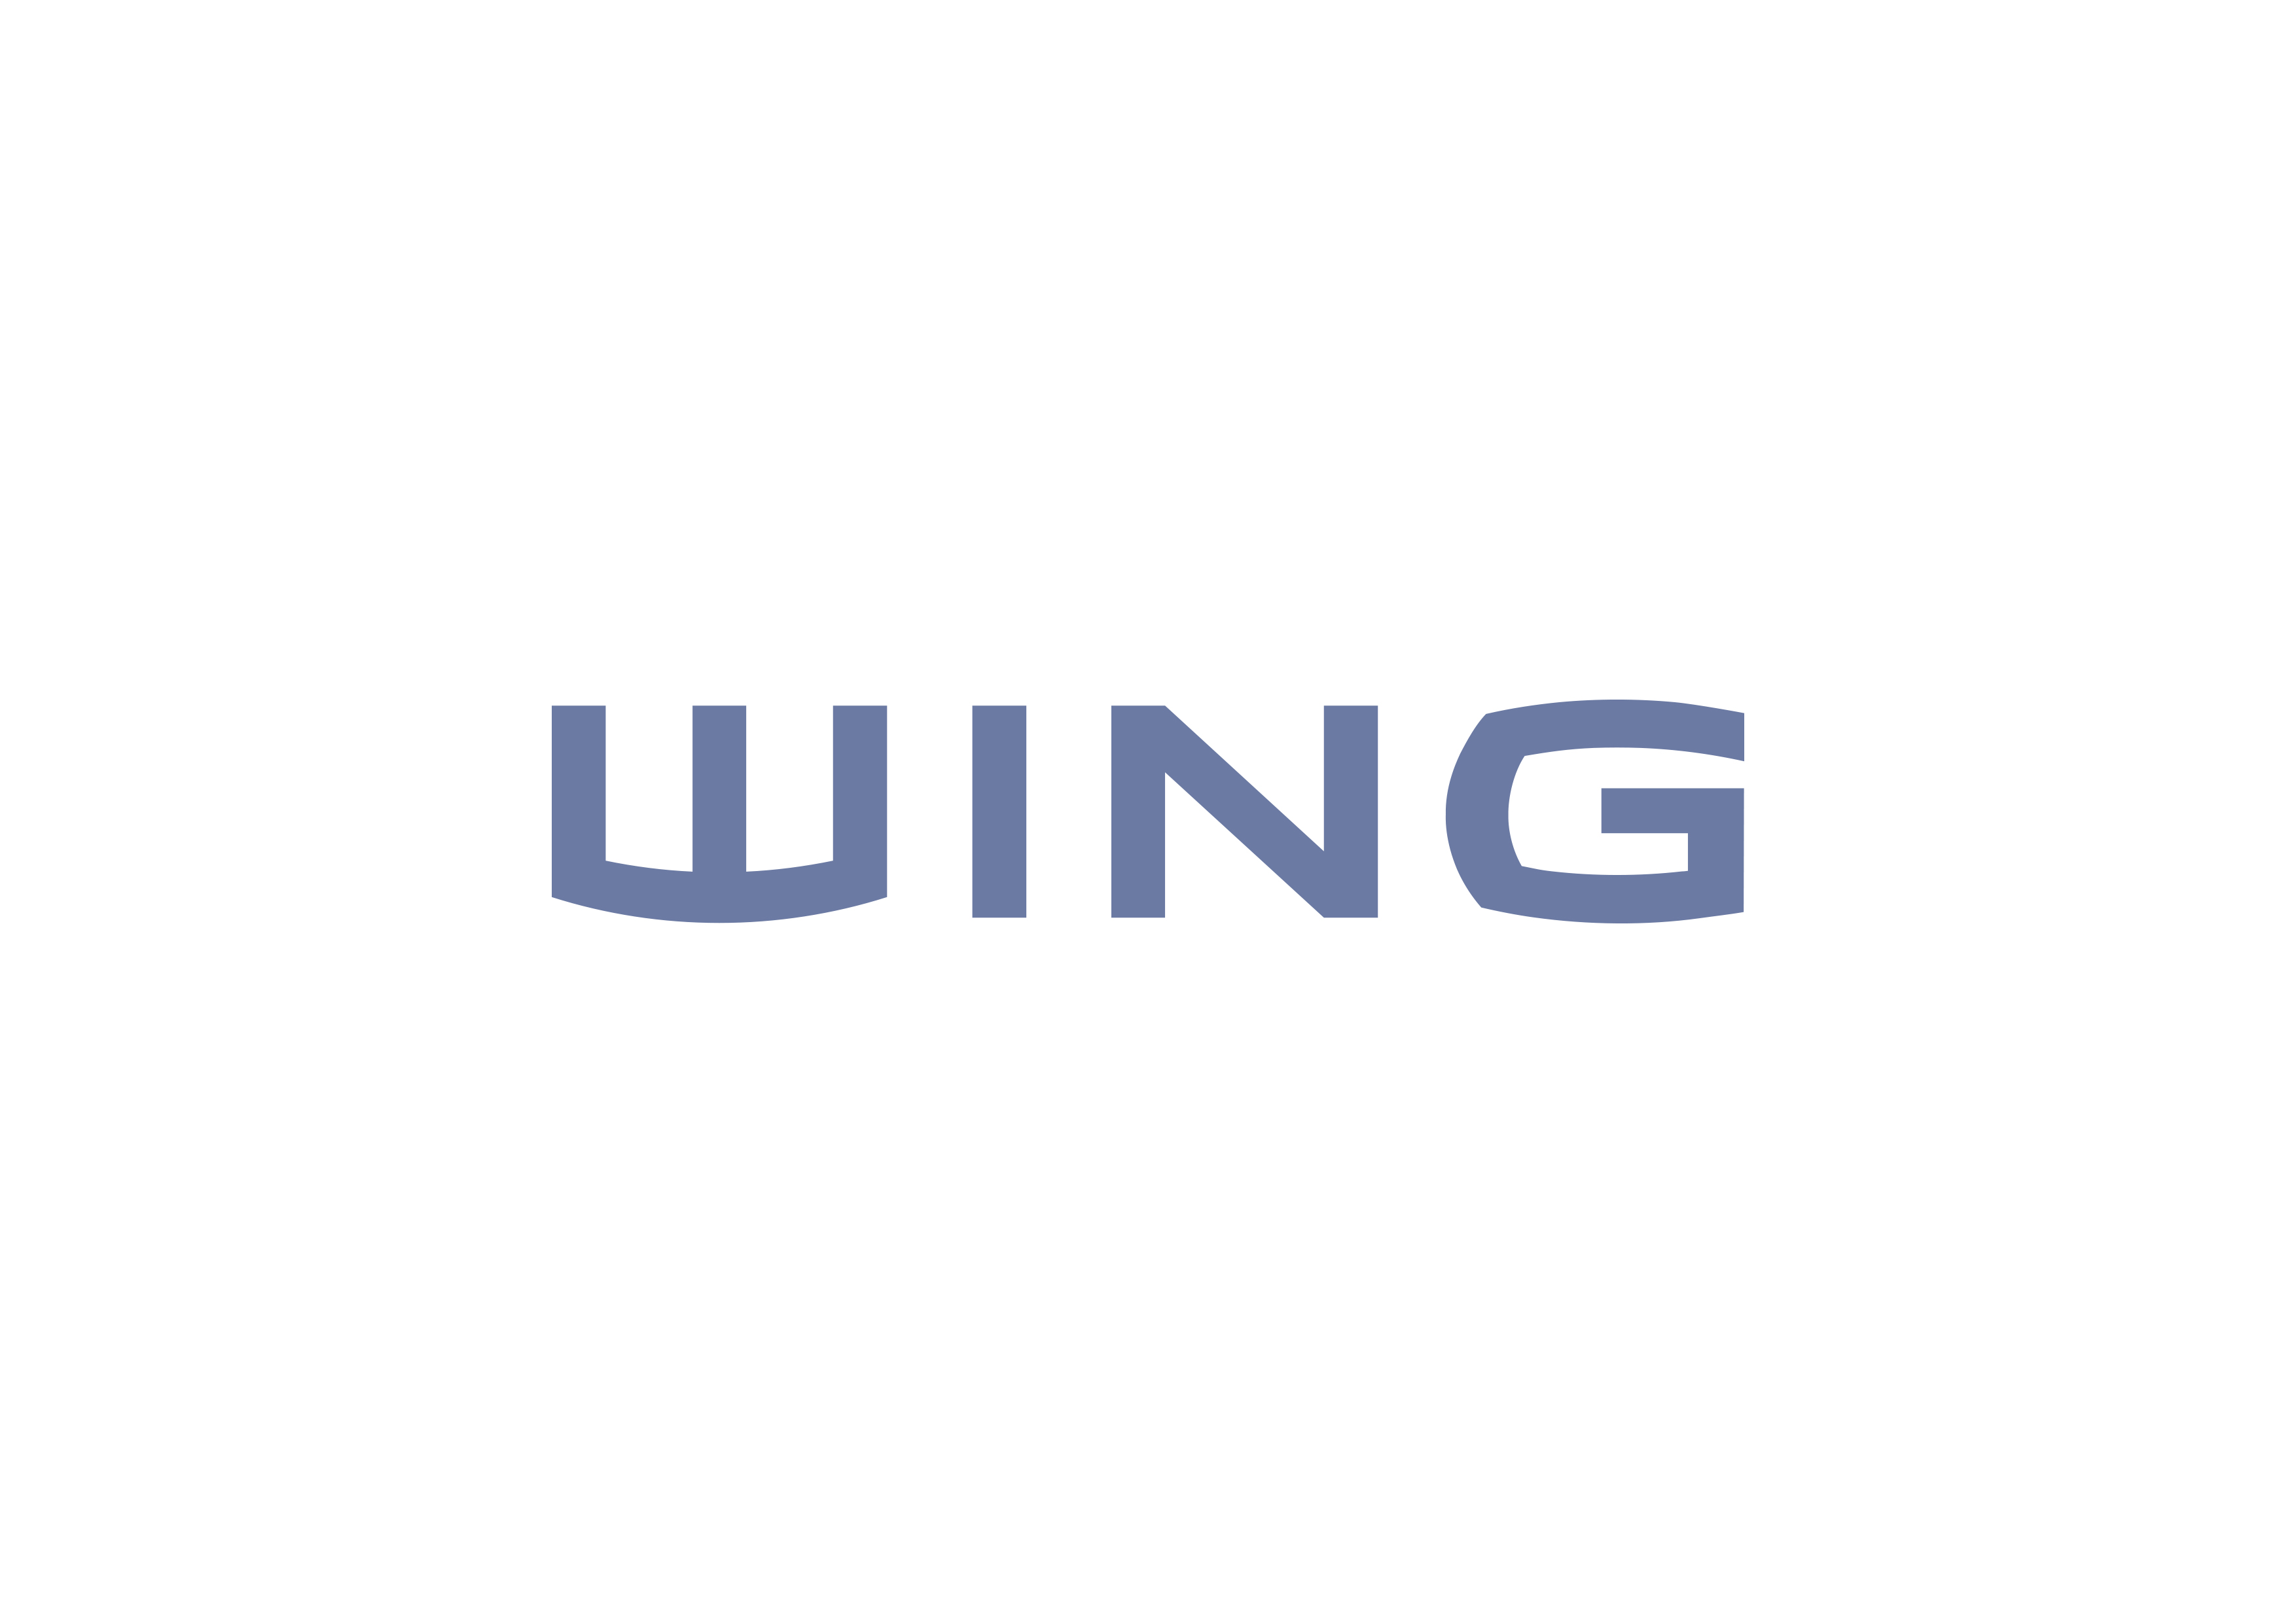 Market-leading property management company now fully owned by the founder Wing